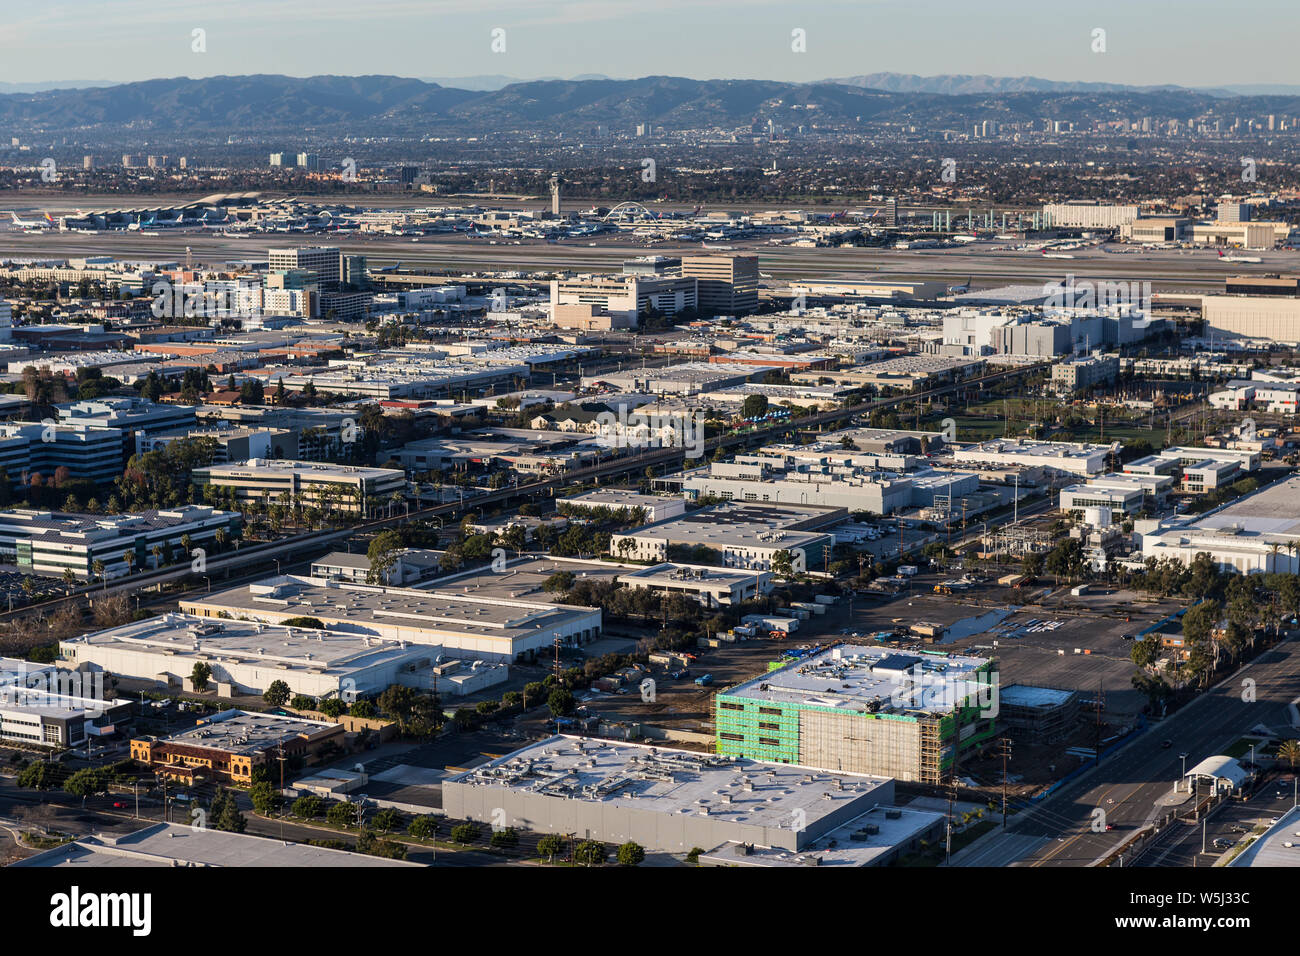 Los Angeles County, California, USA - December 17, 2016:  Aerial view of commercial and industrial buildings south of LAX airport in El Segundo, Cali Stock Photo